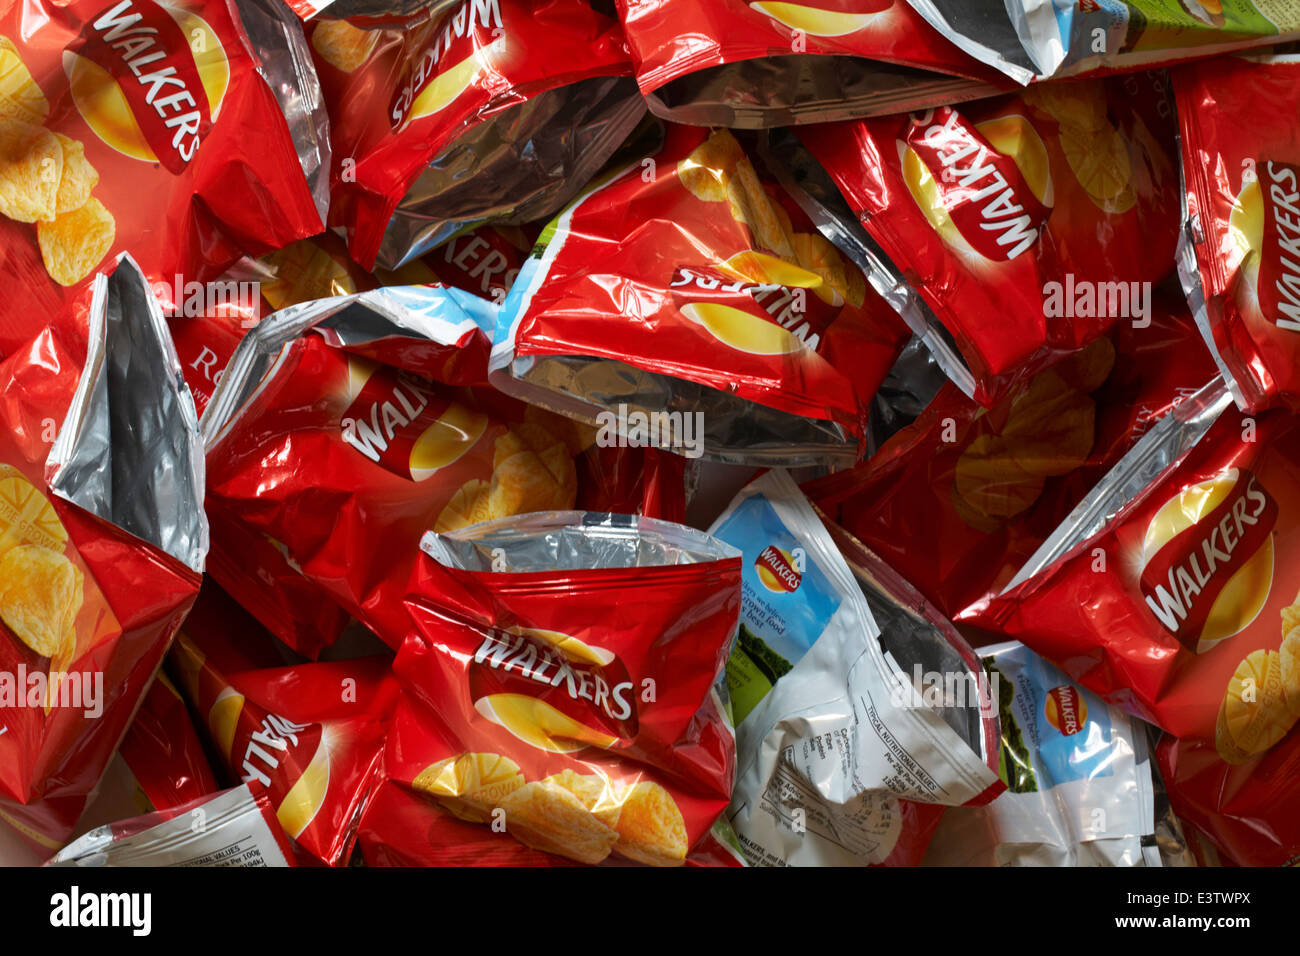 pile heap of empty packet of Walkers Ready Salted crisps Stock Photo